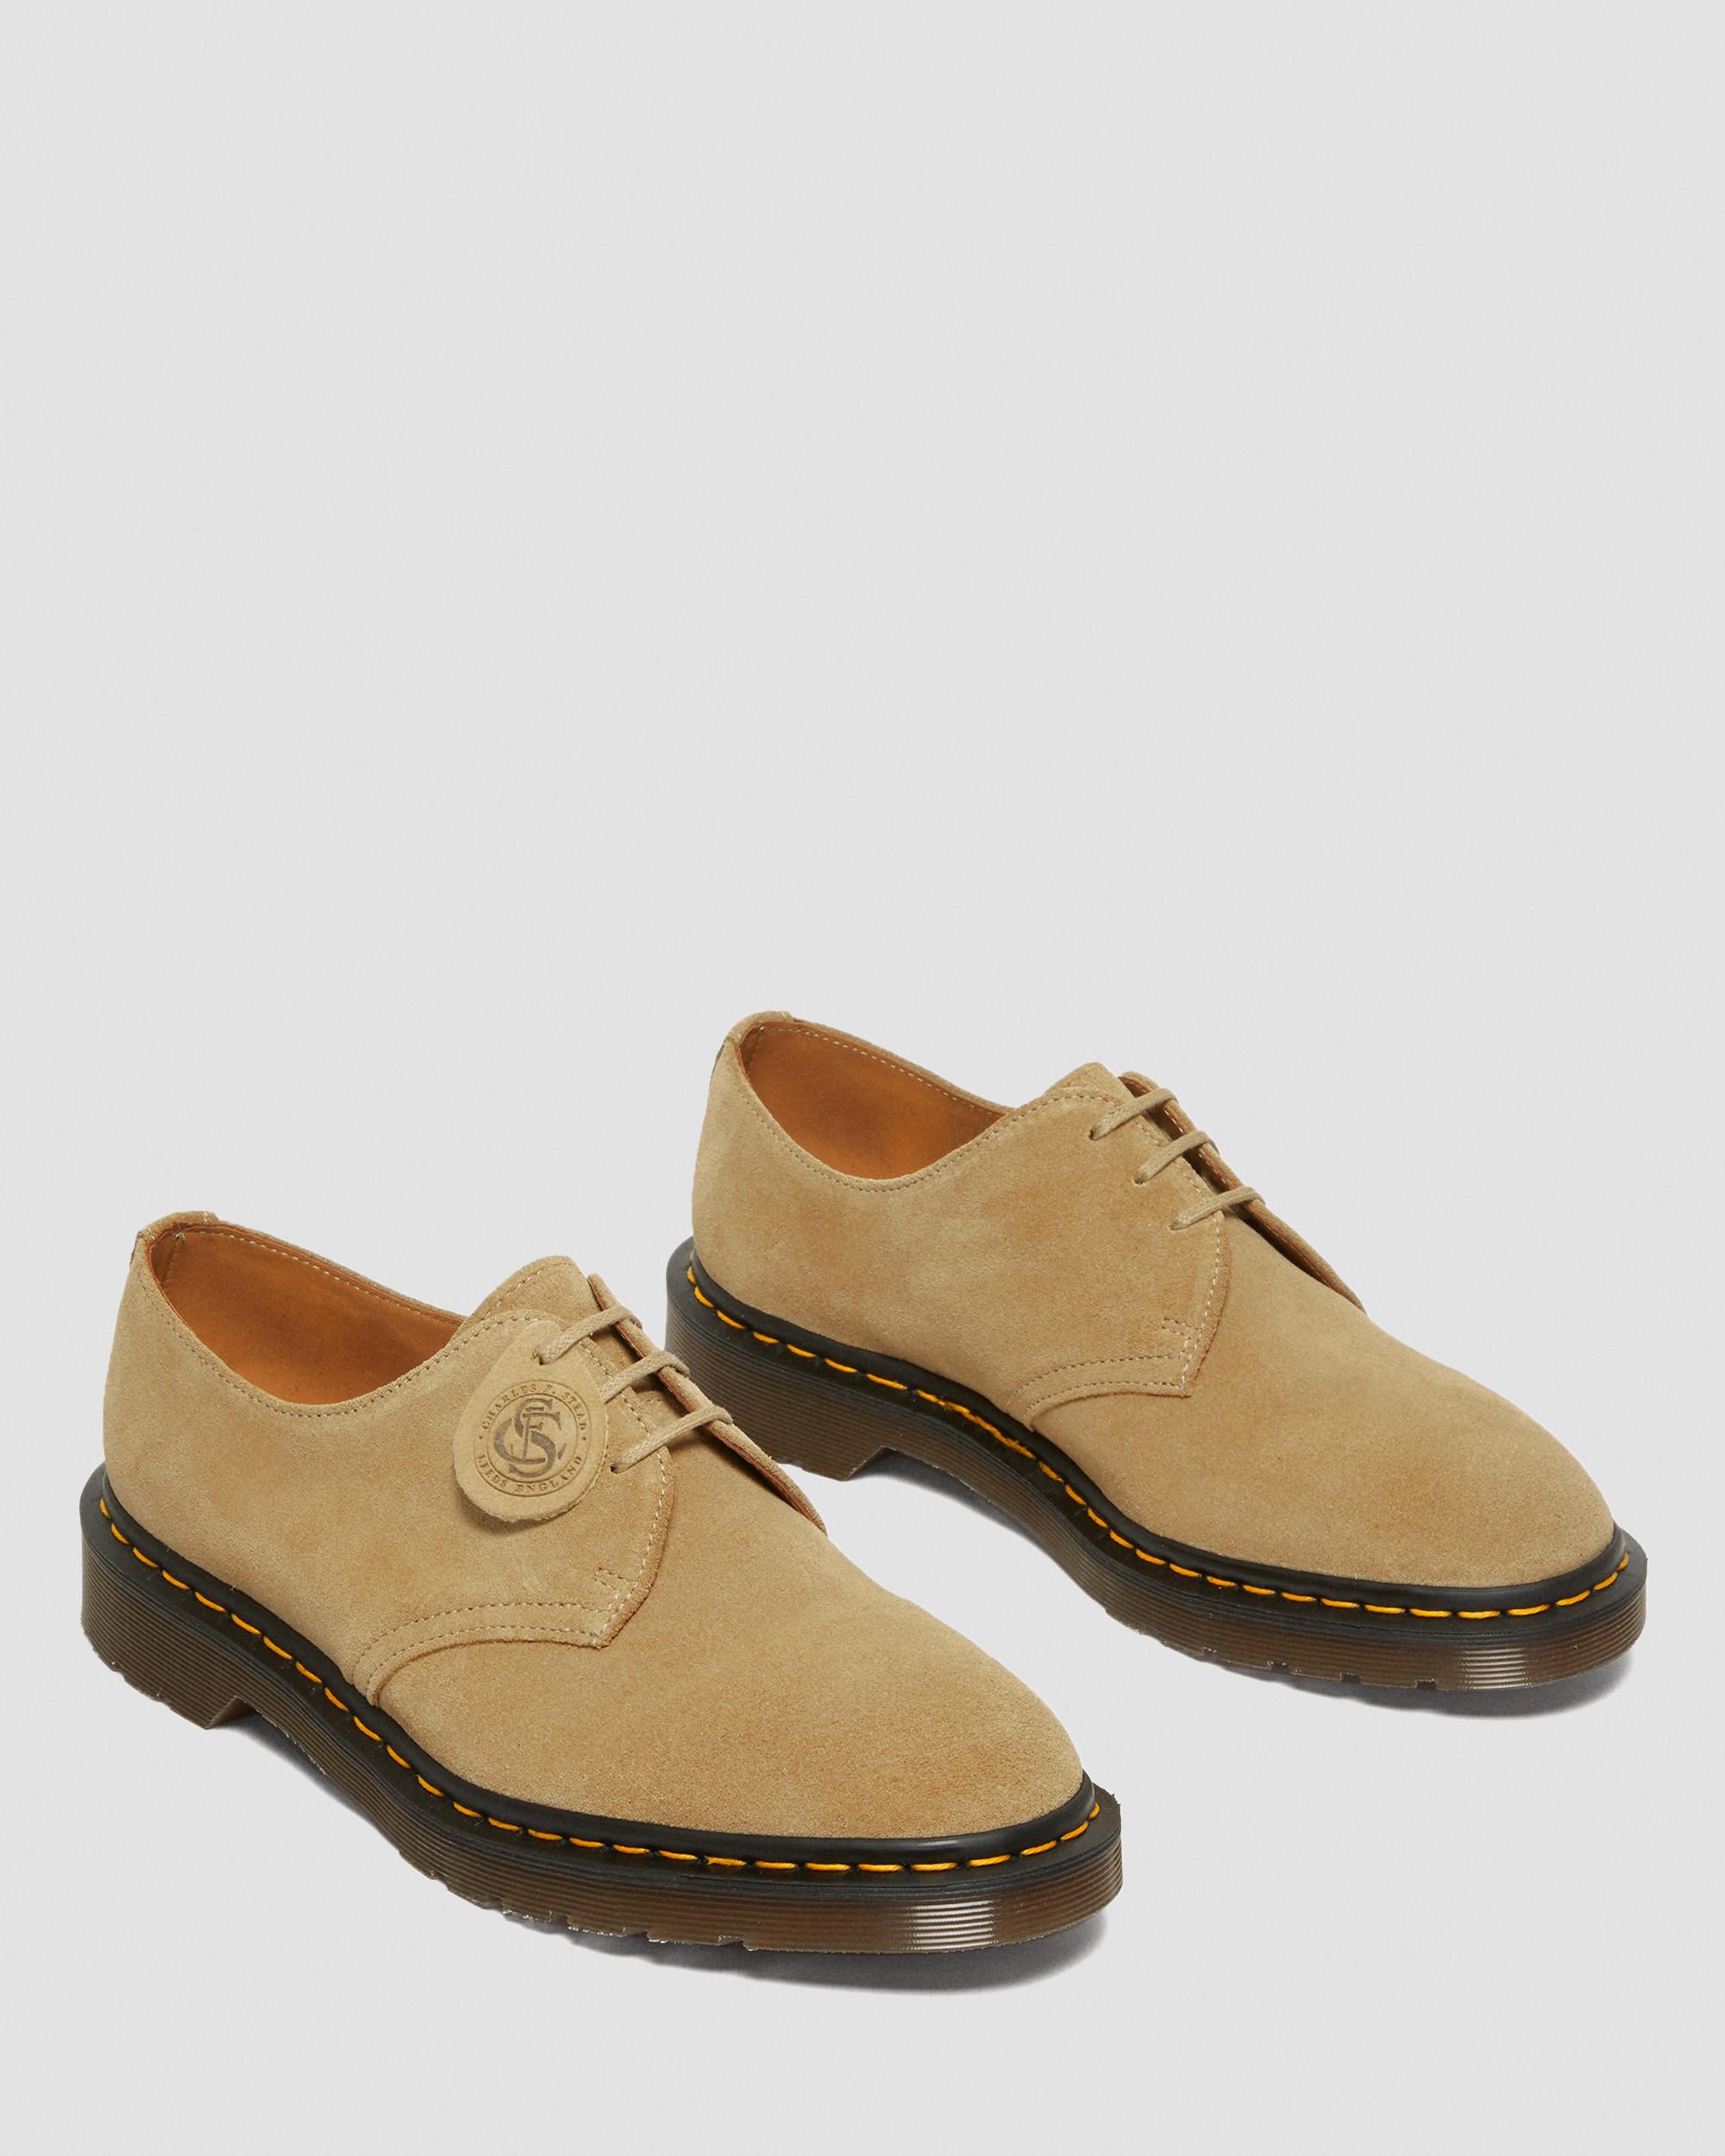 1461 Made in England Buck Suede Oxford Shoes1461 Made in England Buck -mokkakengät Dr. Martens